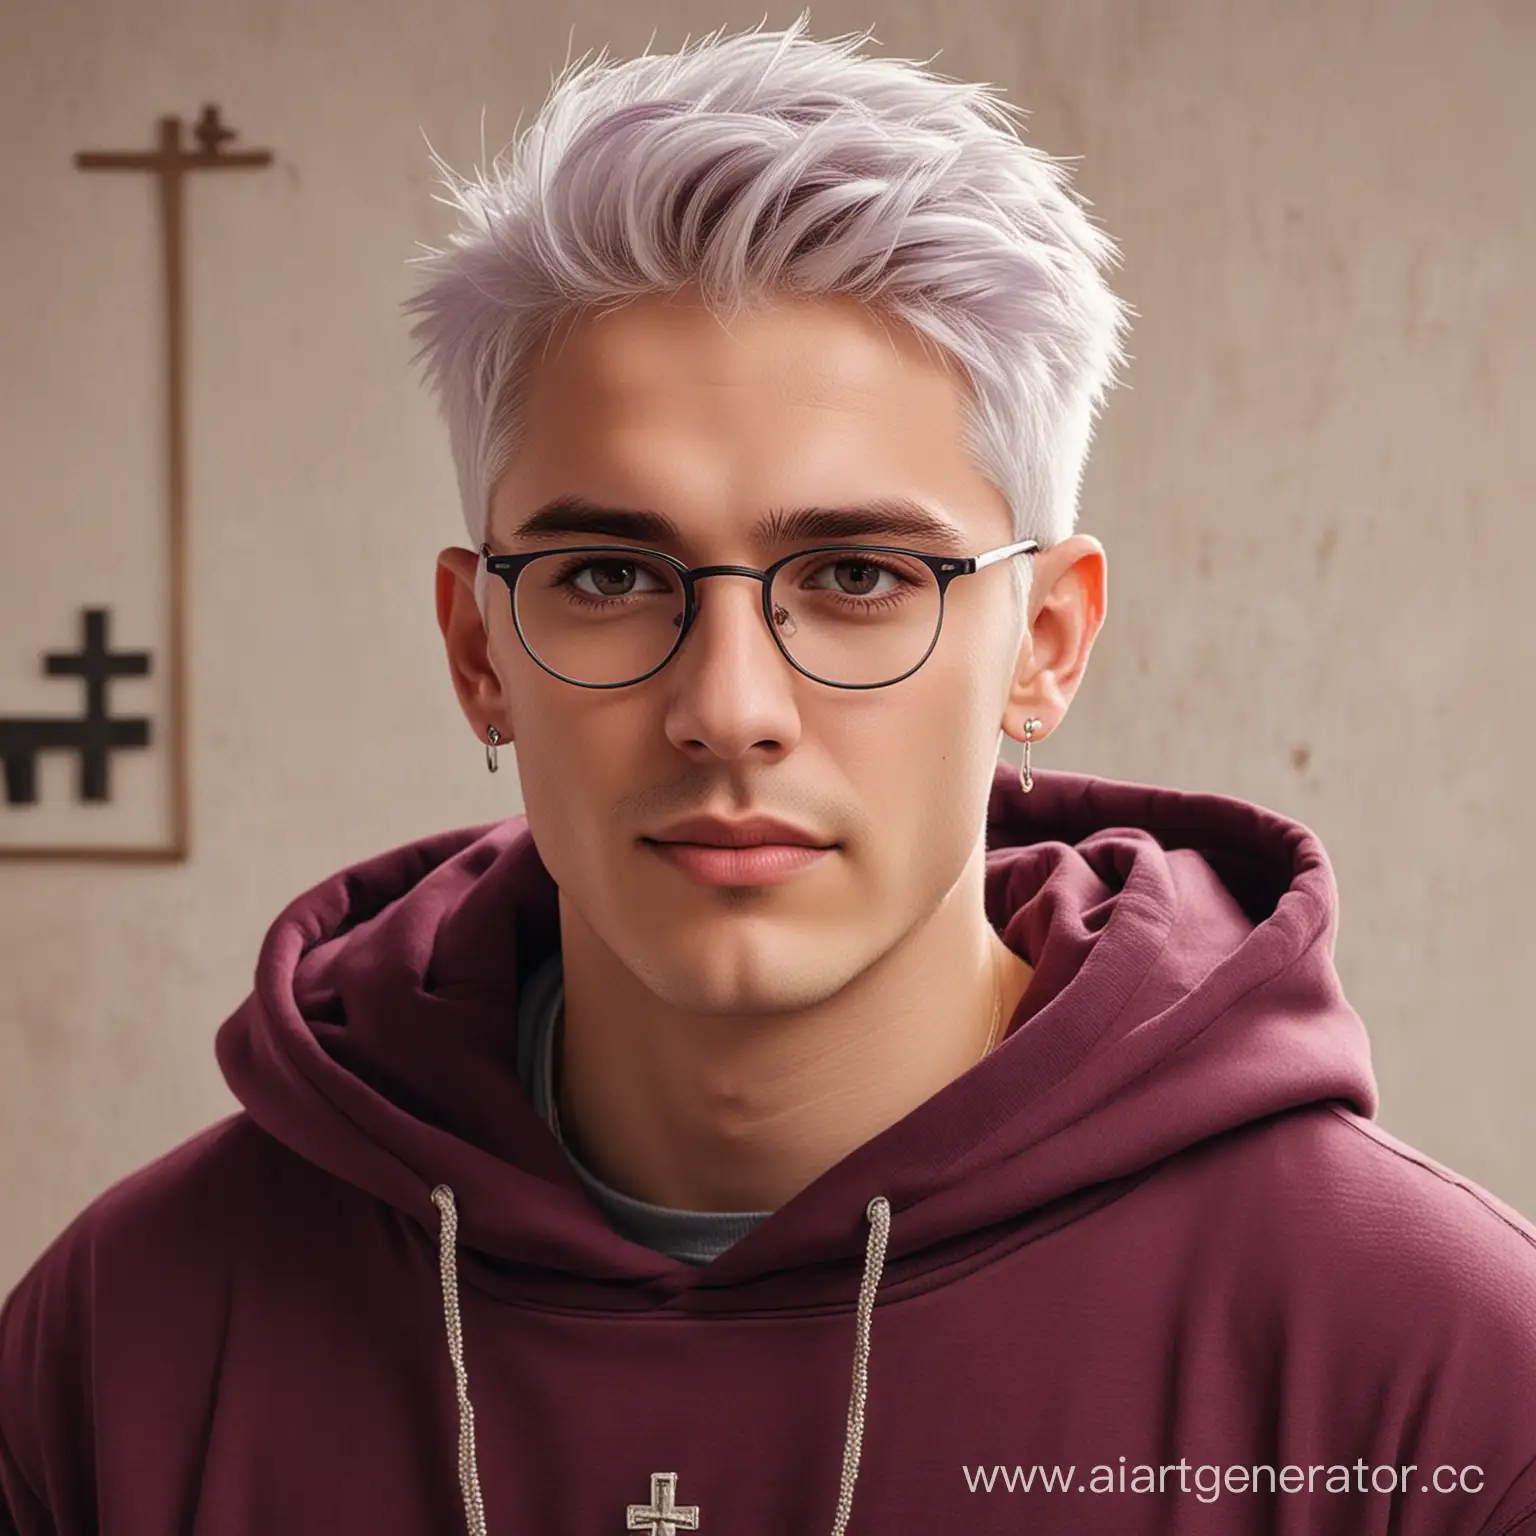 Stylish-Character-with-White-Hair-and-Purple-Eyes-in-Burgundy-Hoodie